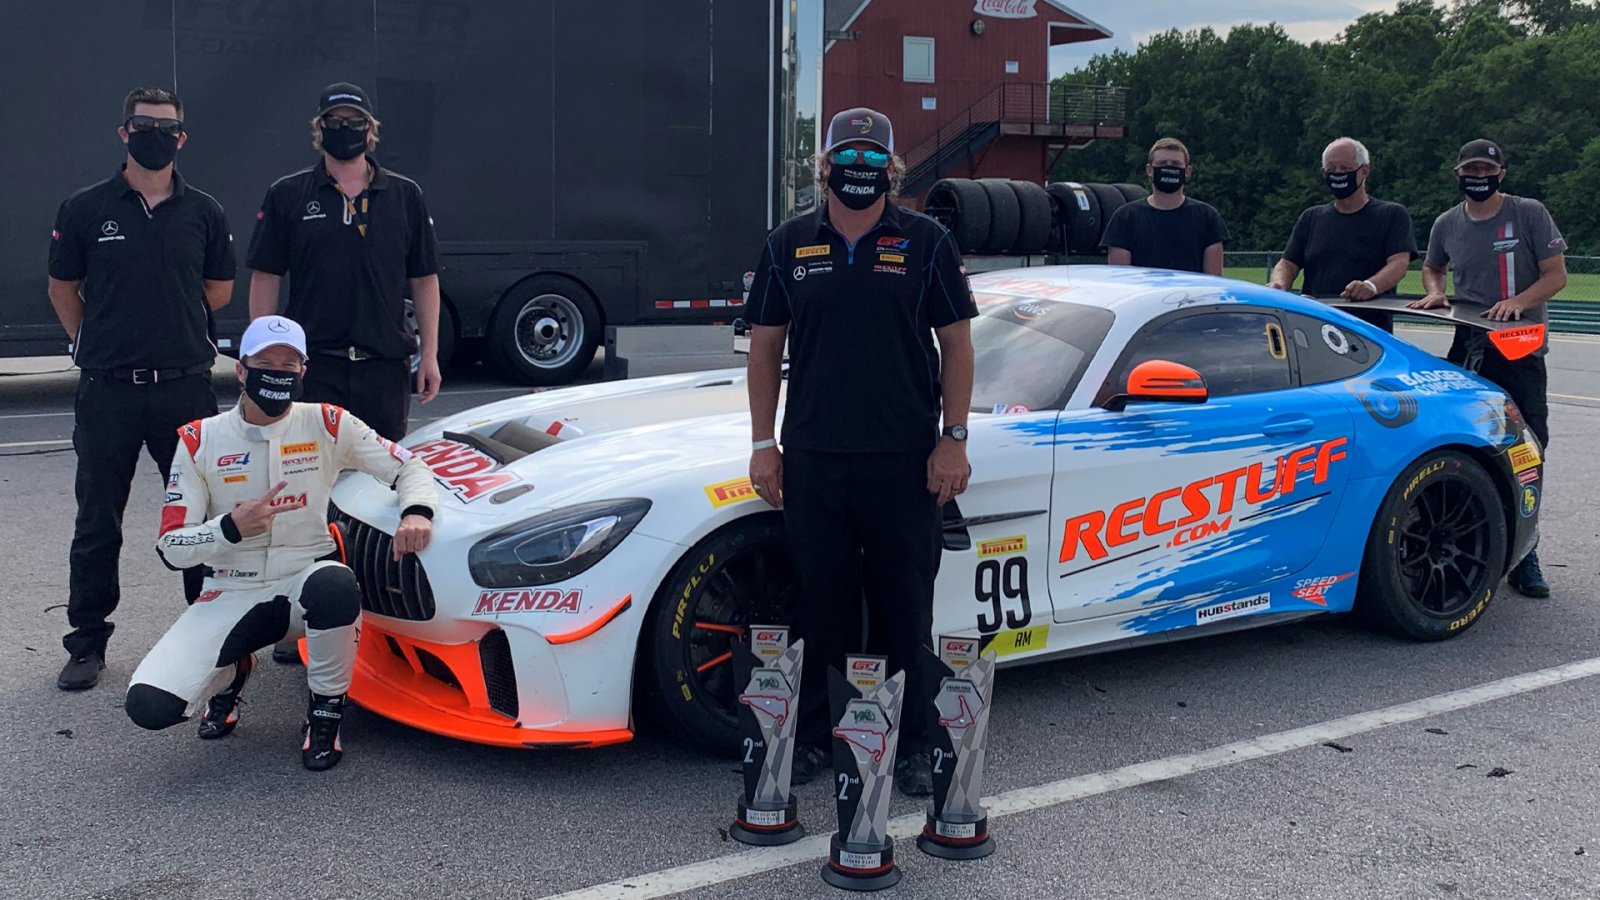 Courtney, RecStuff Racing Back in Action at VIR with Three Runner-up Finishes and Fastest Laps